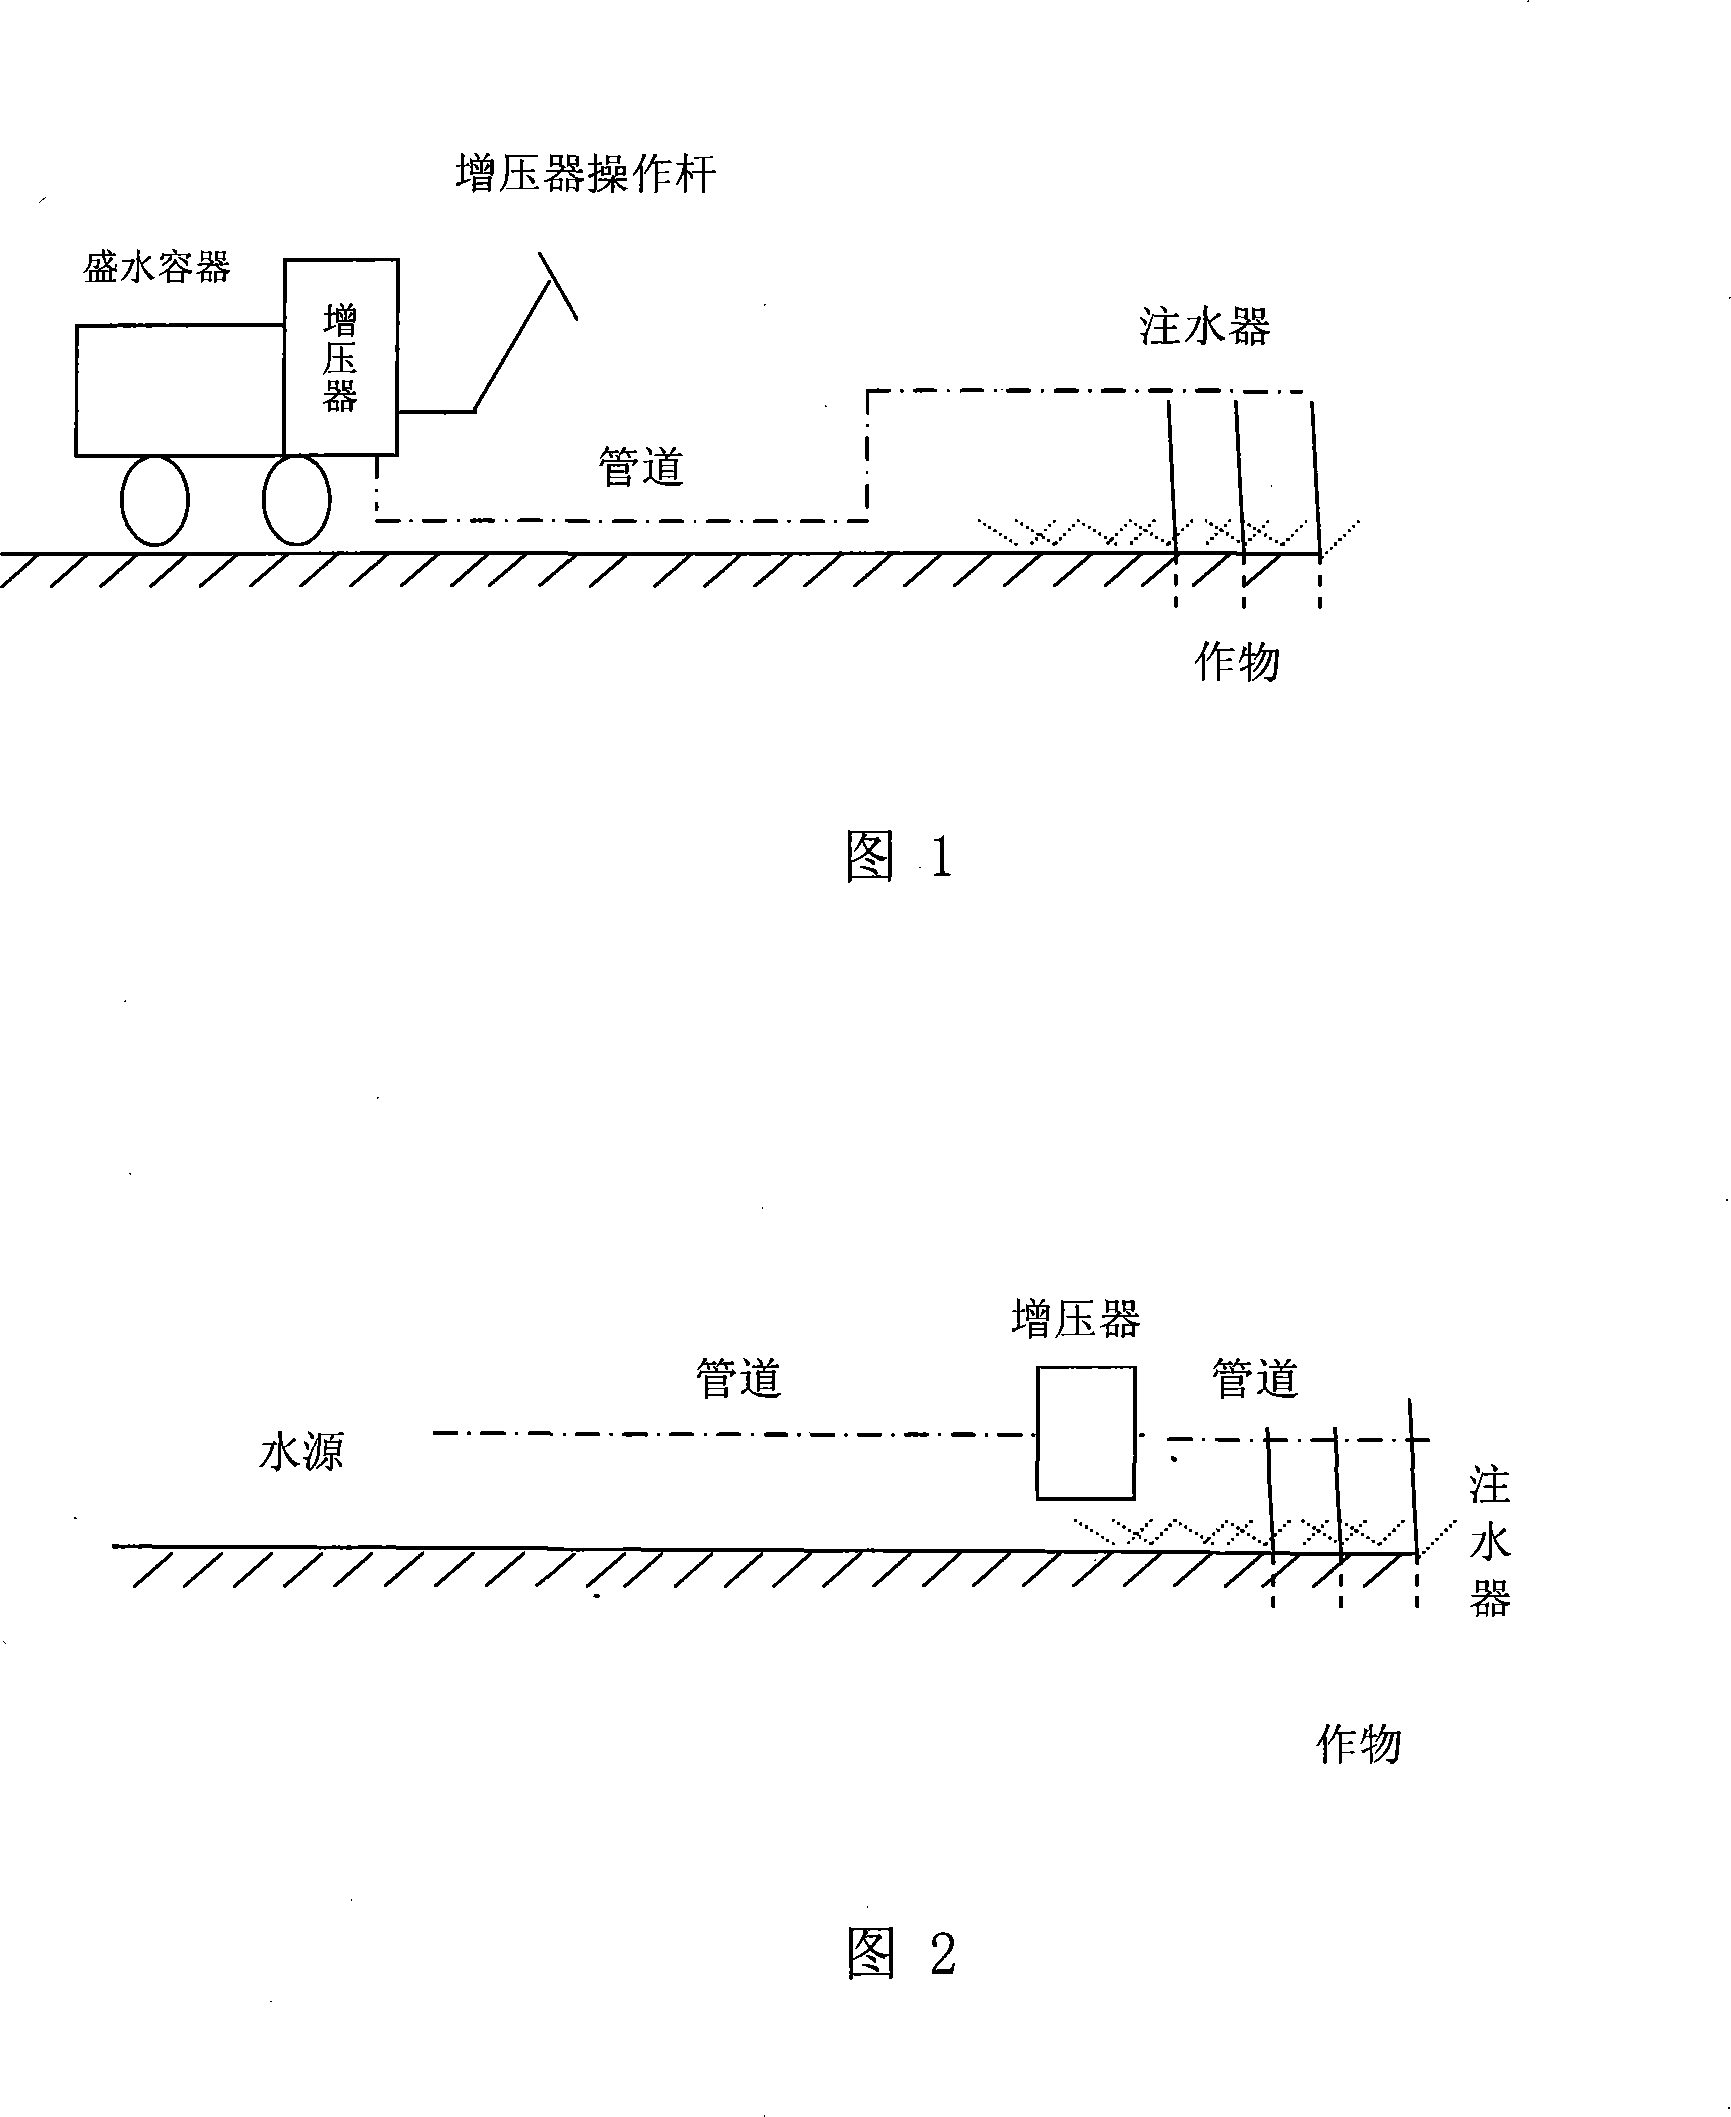 Moveable voltage-increasing type water complementing device for dry land